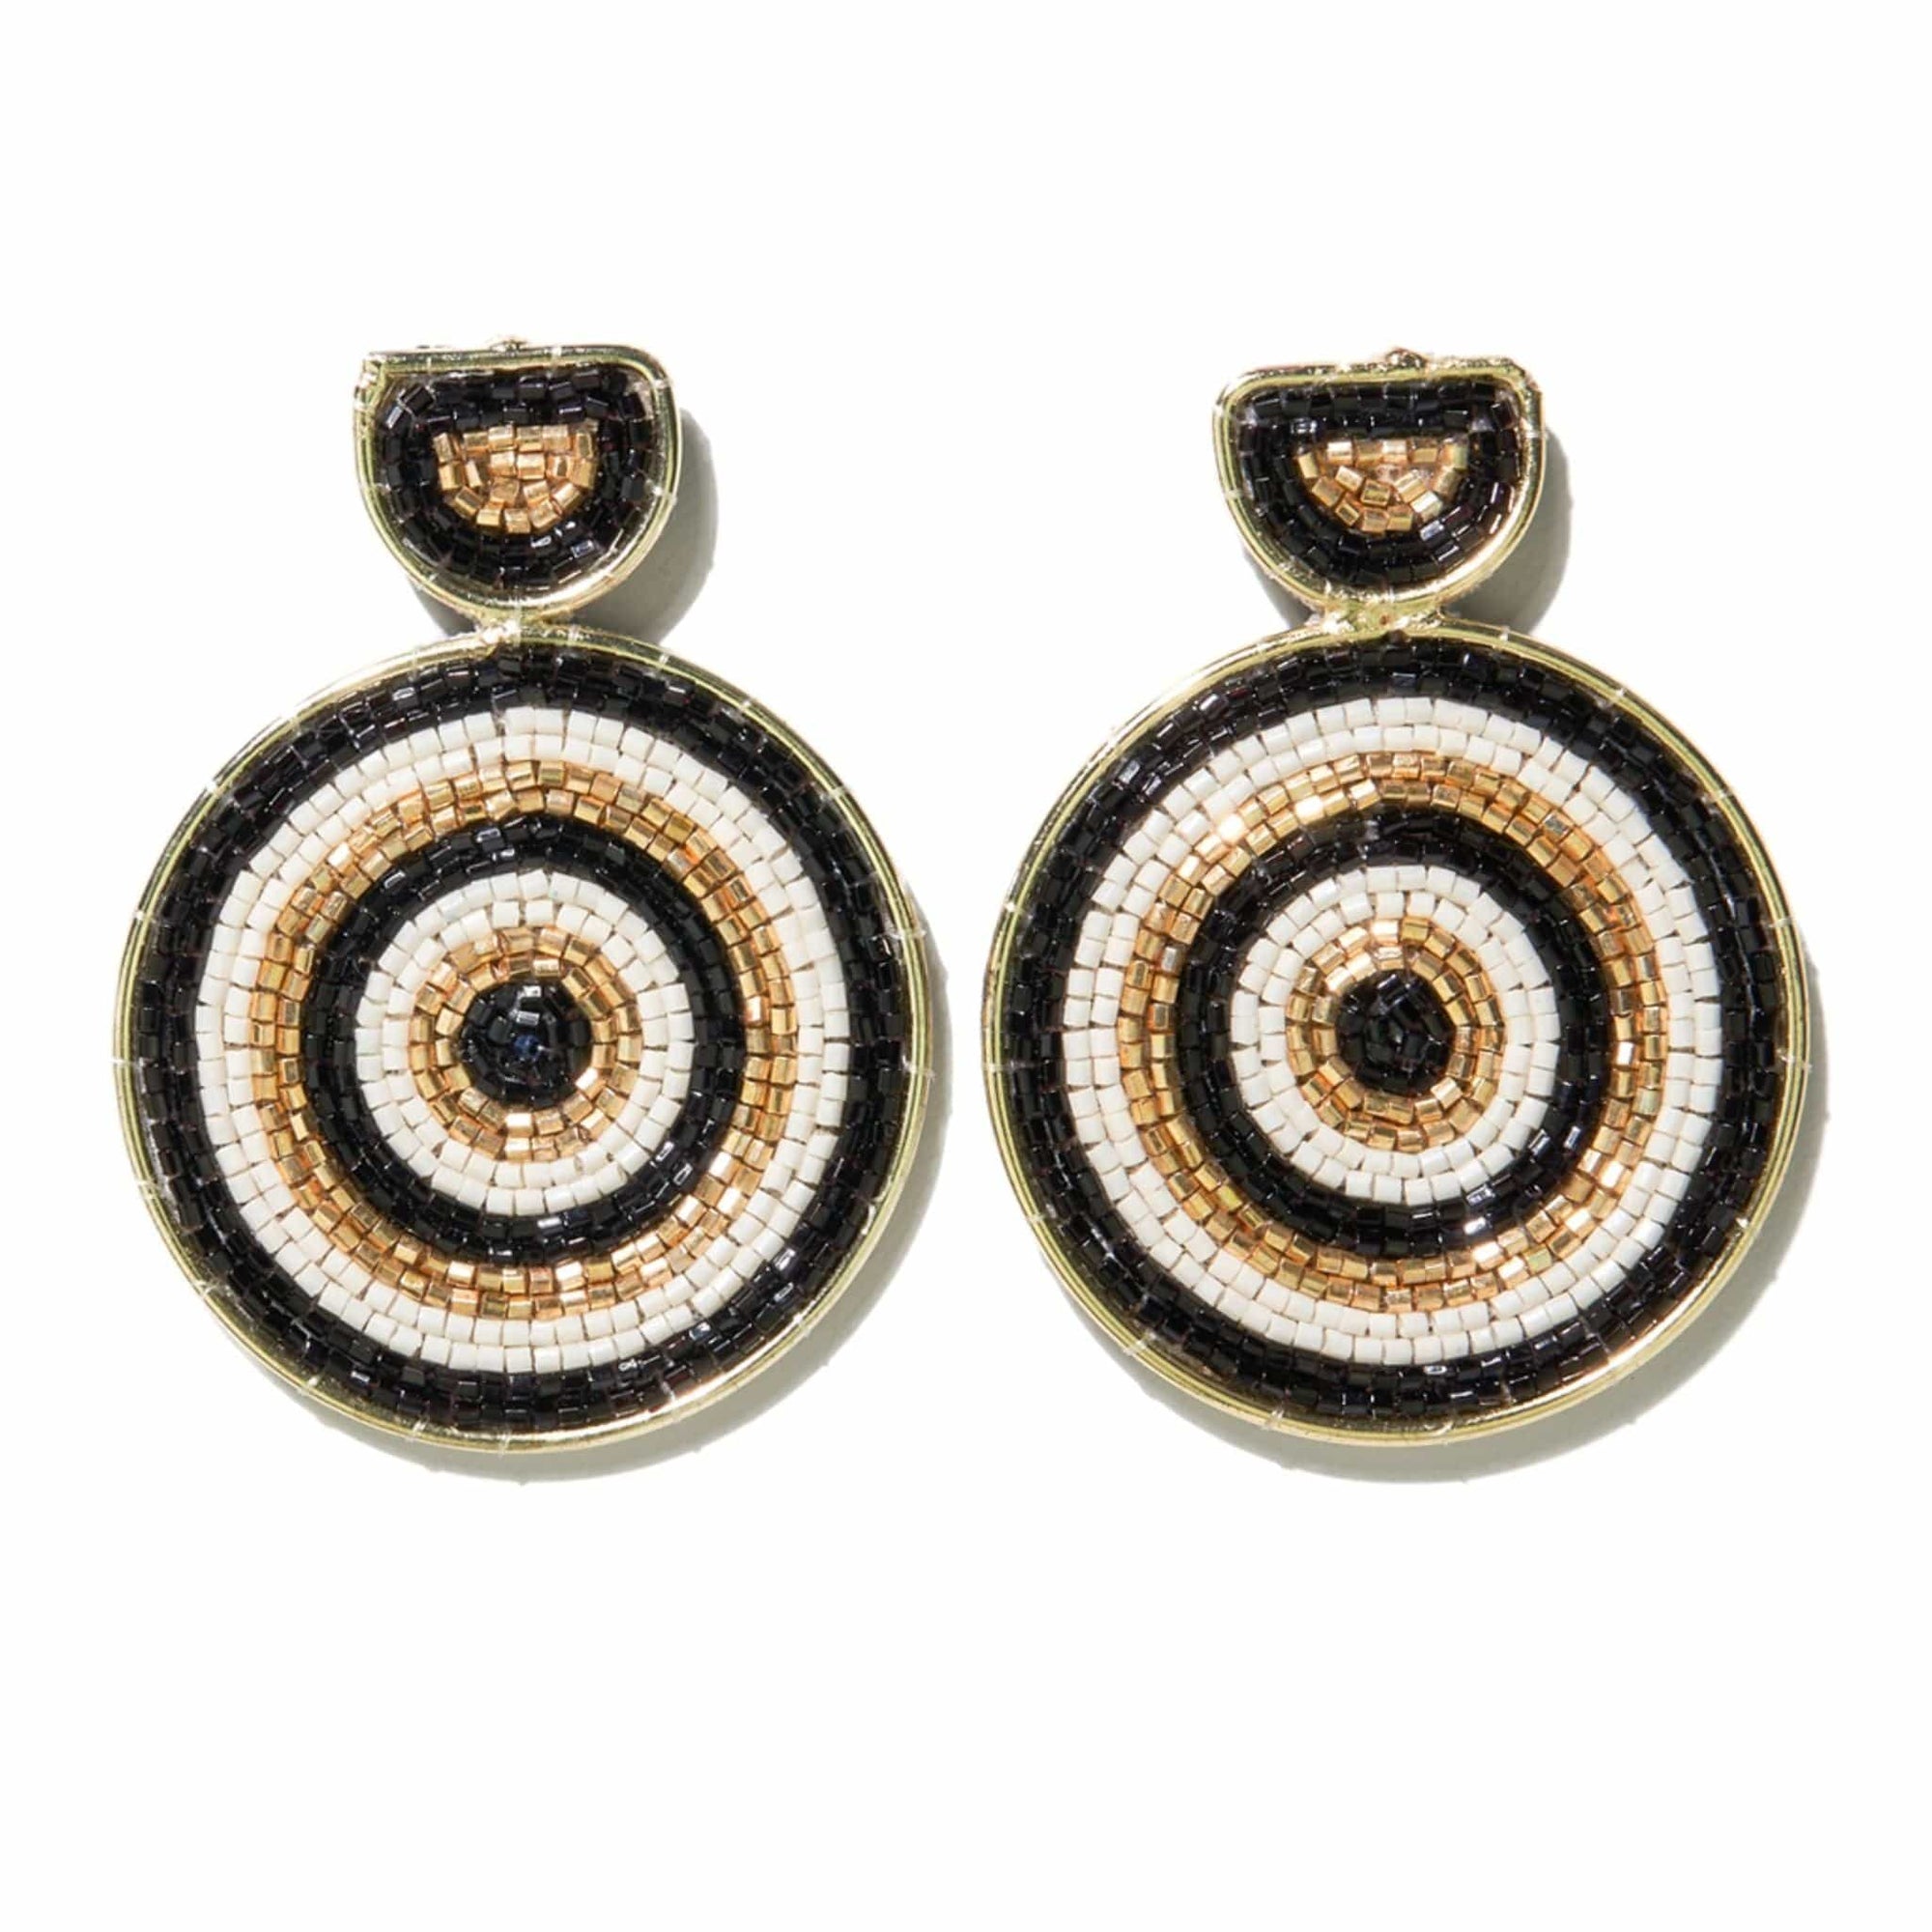 Stella Circular Striped Earrings Black and White Wholesale